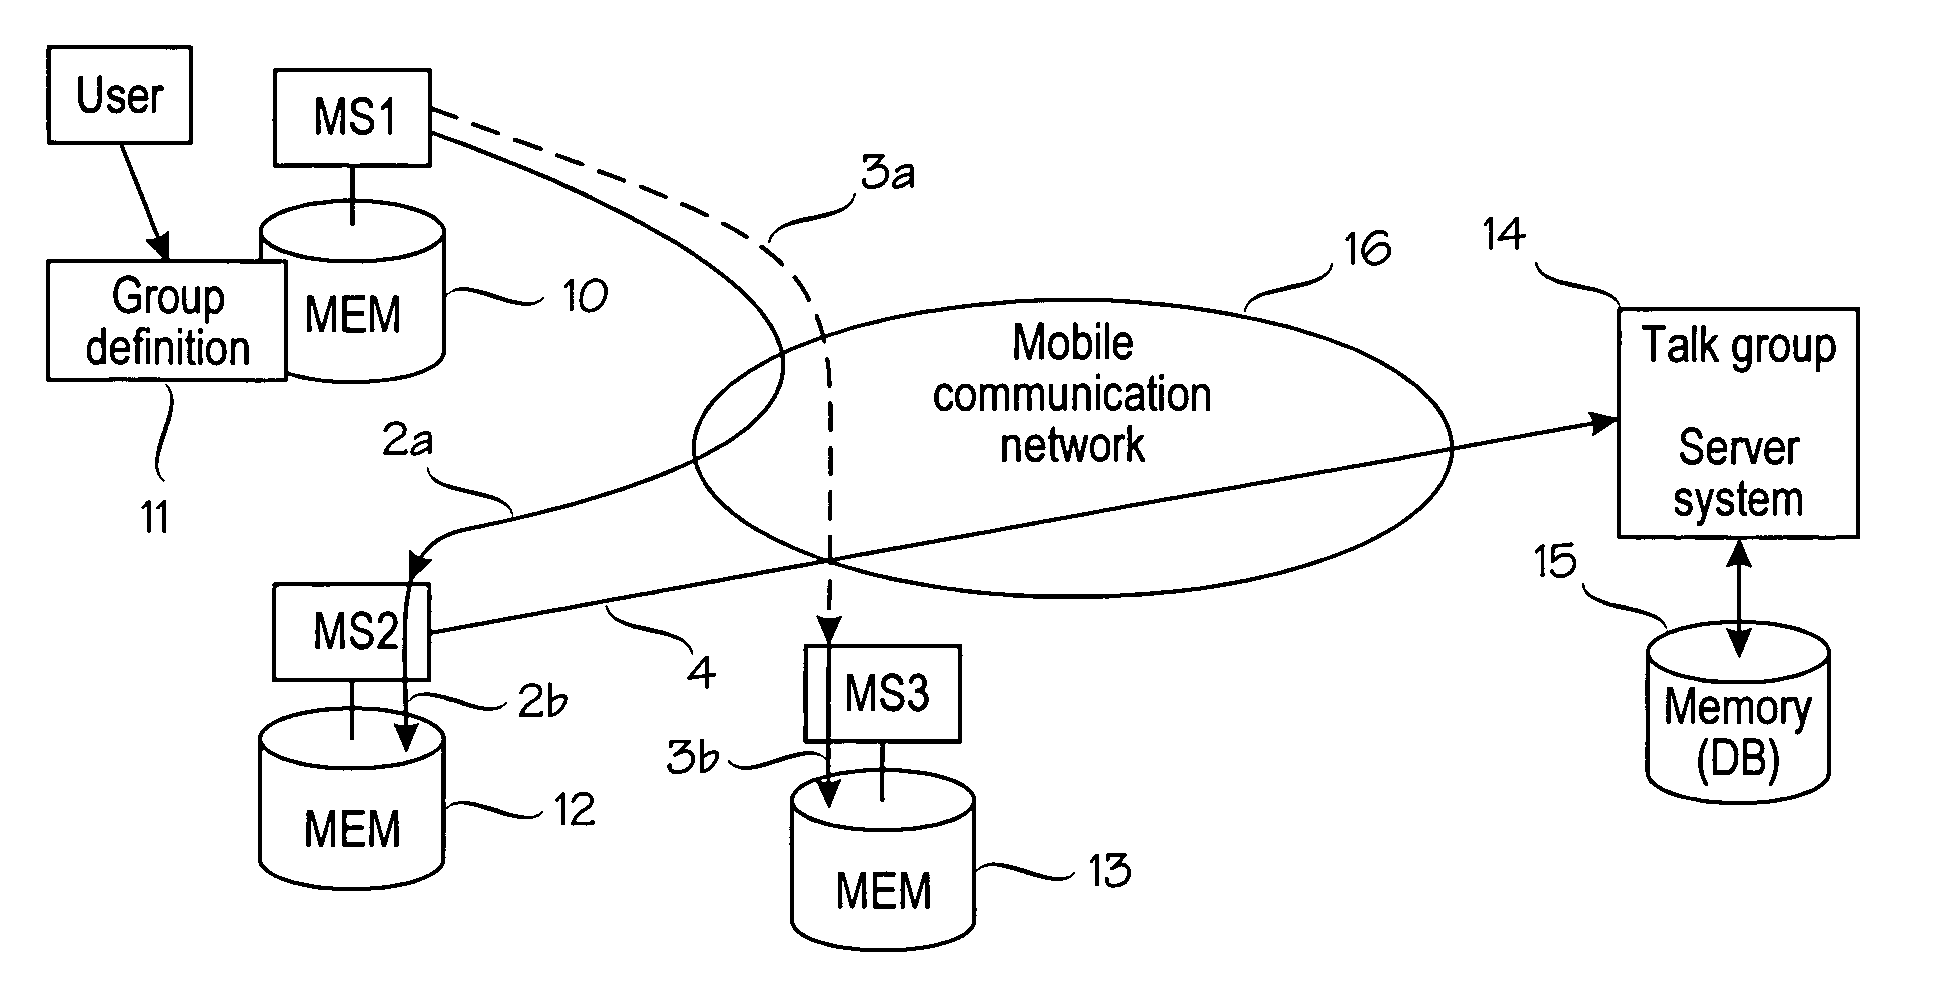 Method for creating a dynamic talk group